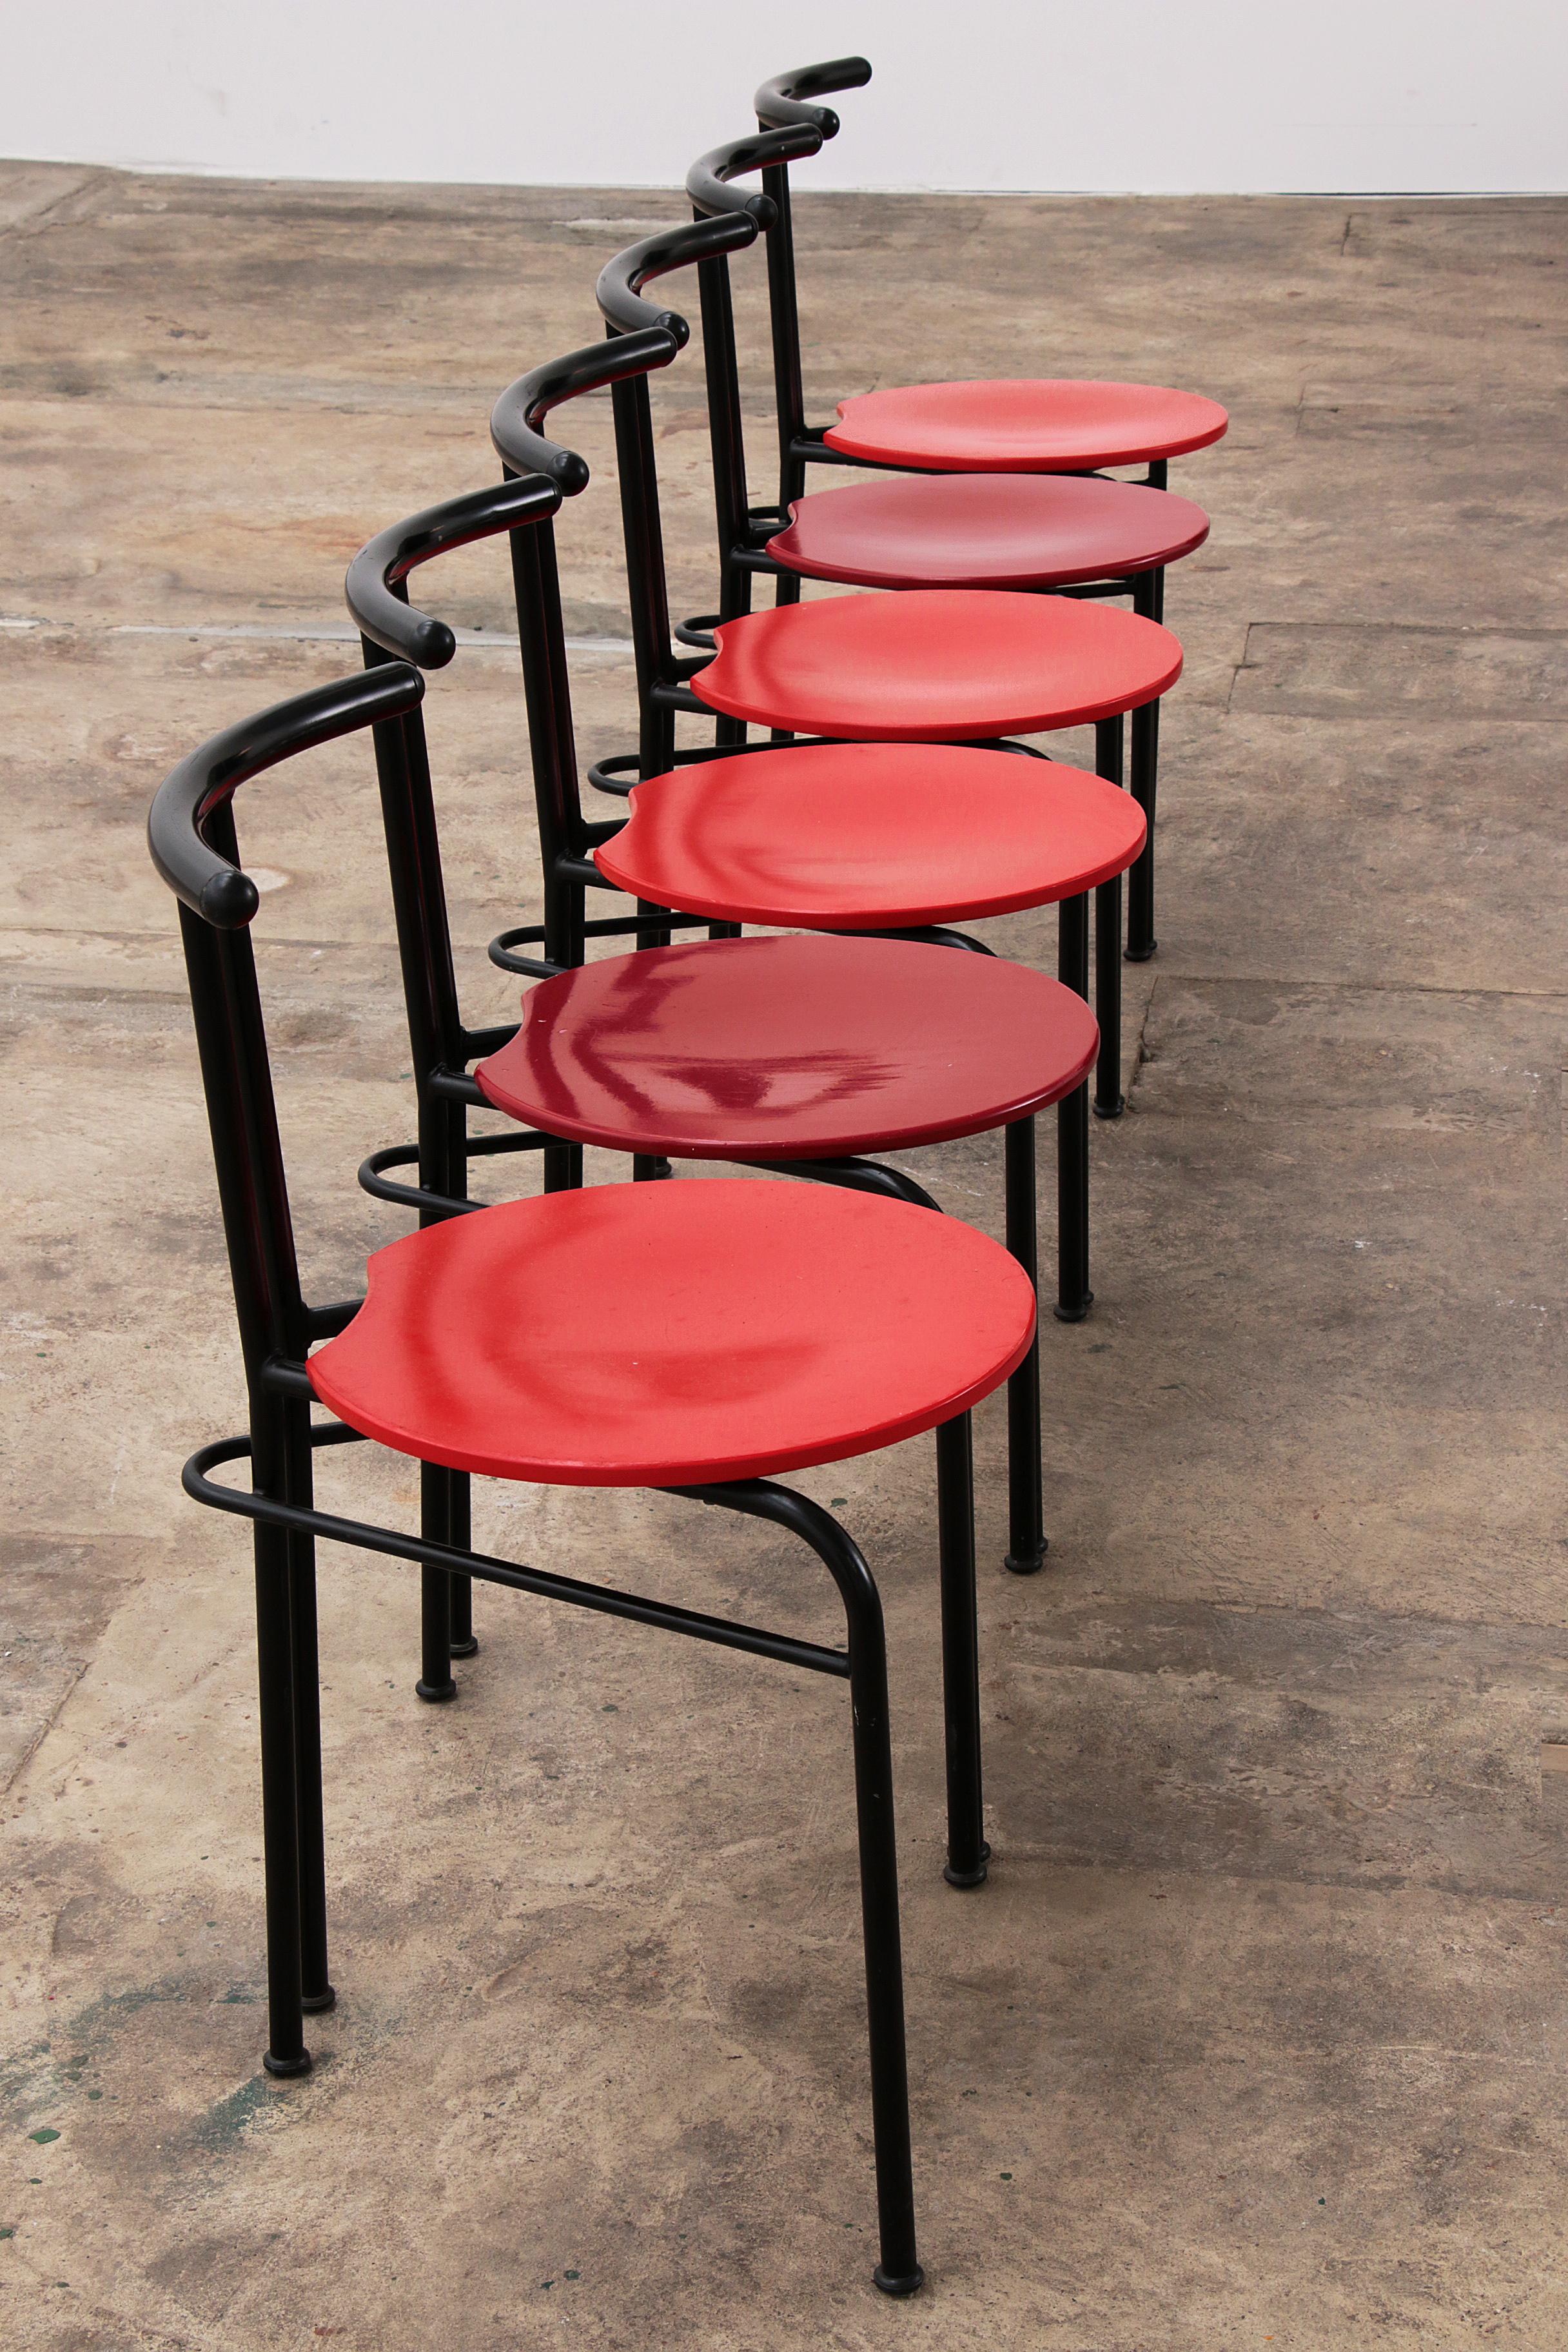 Postmodern Dining Table Chairs with Red Seat - Set of 6 For Sale 2